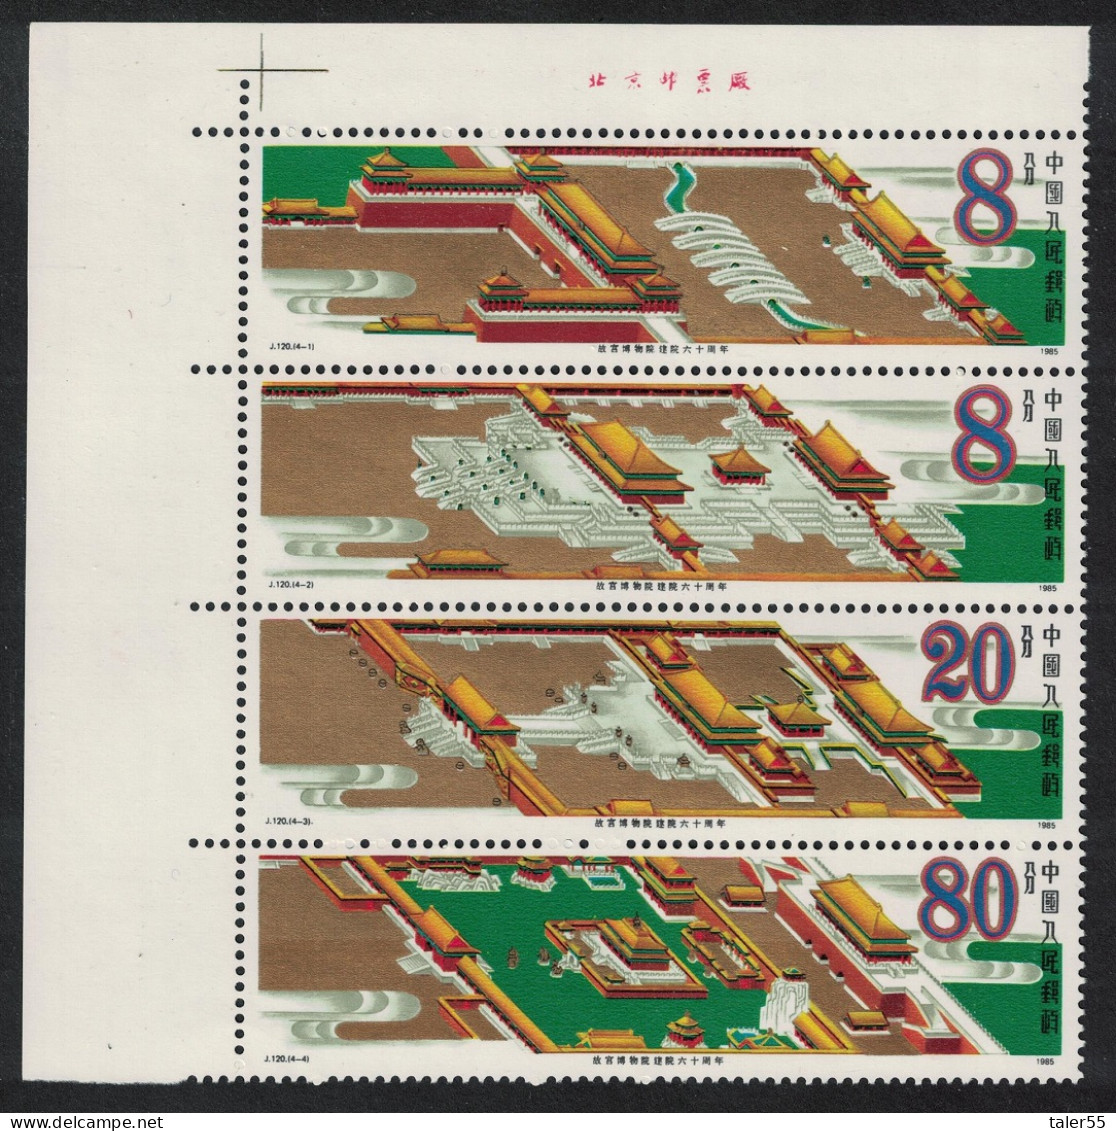 China Imperial Palace Museum Corner Block 1985 MNH SG#3415-3418 MI#2038-2041 Sc#2015a - Unused Stamps